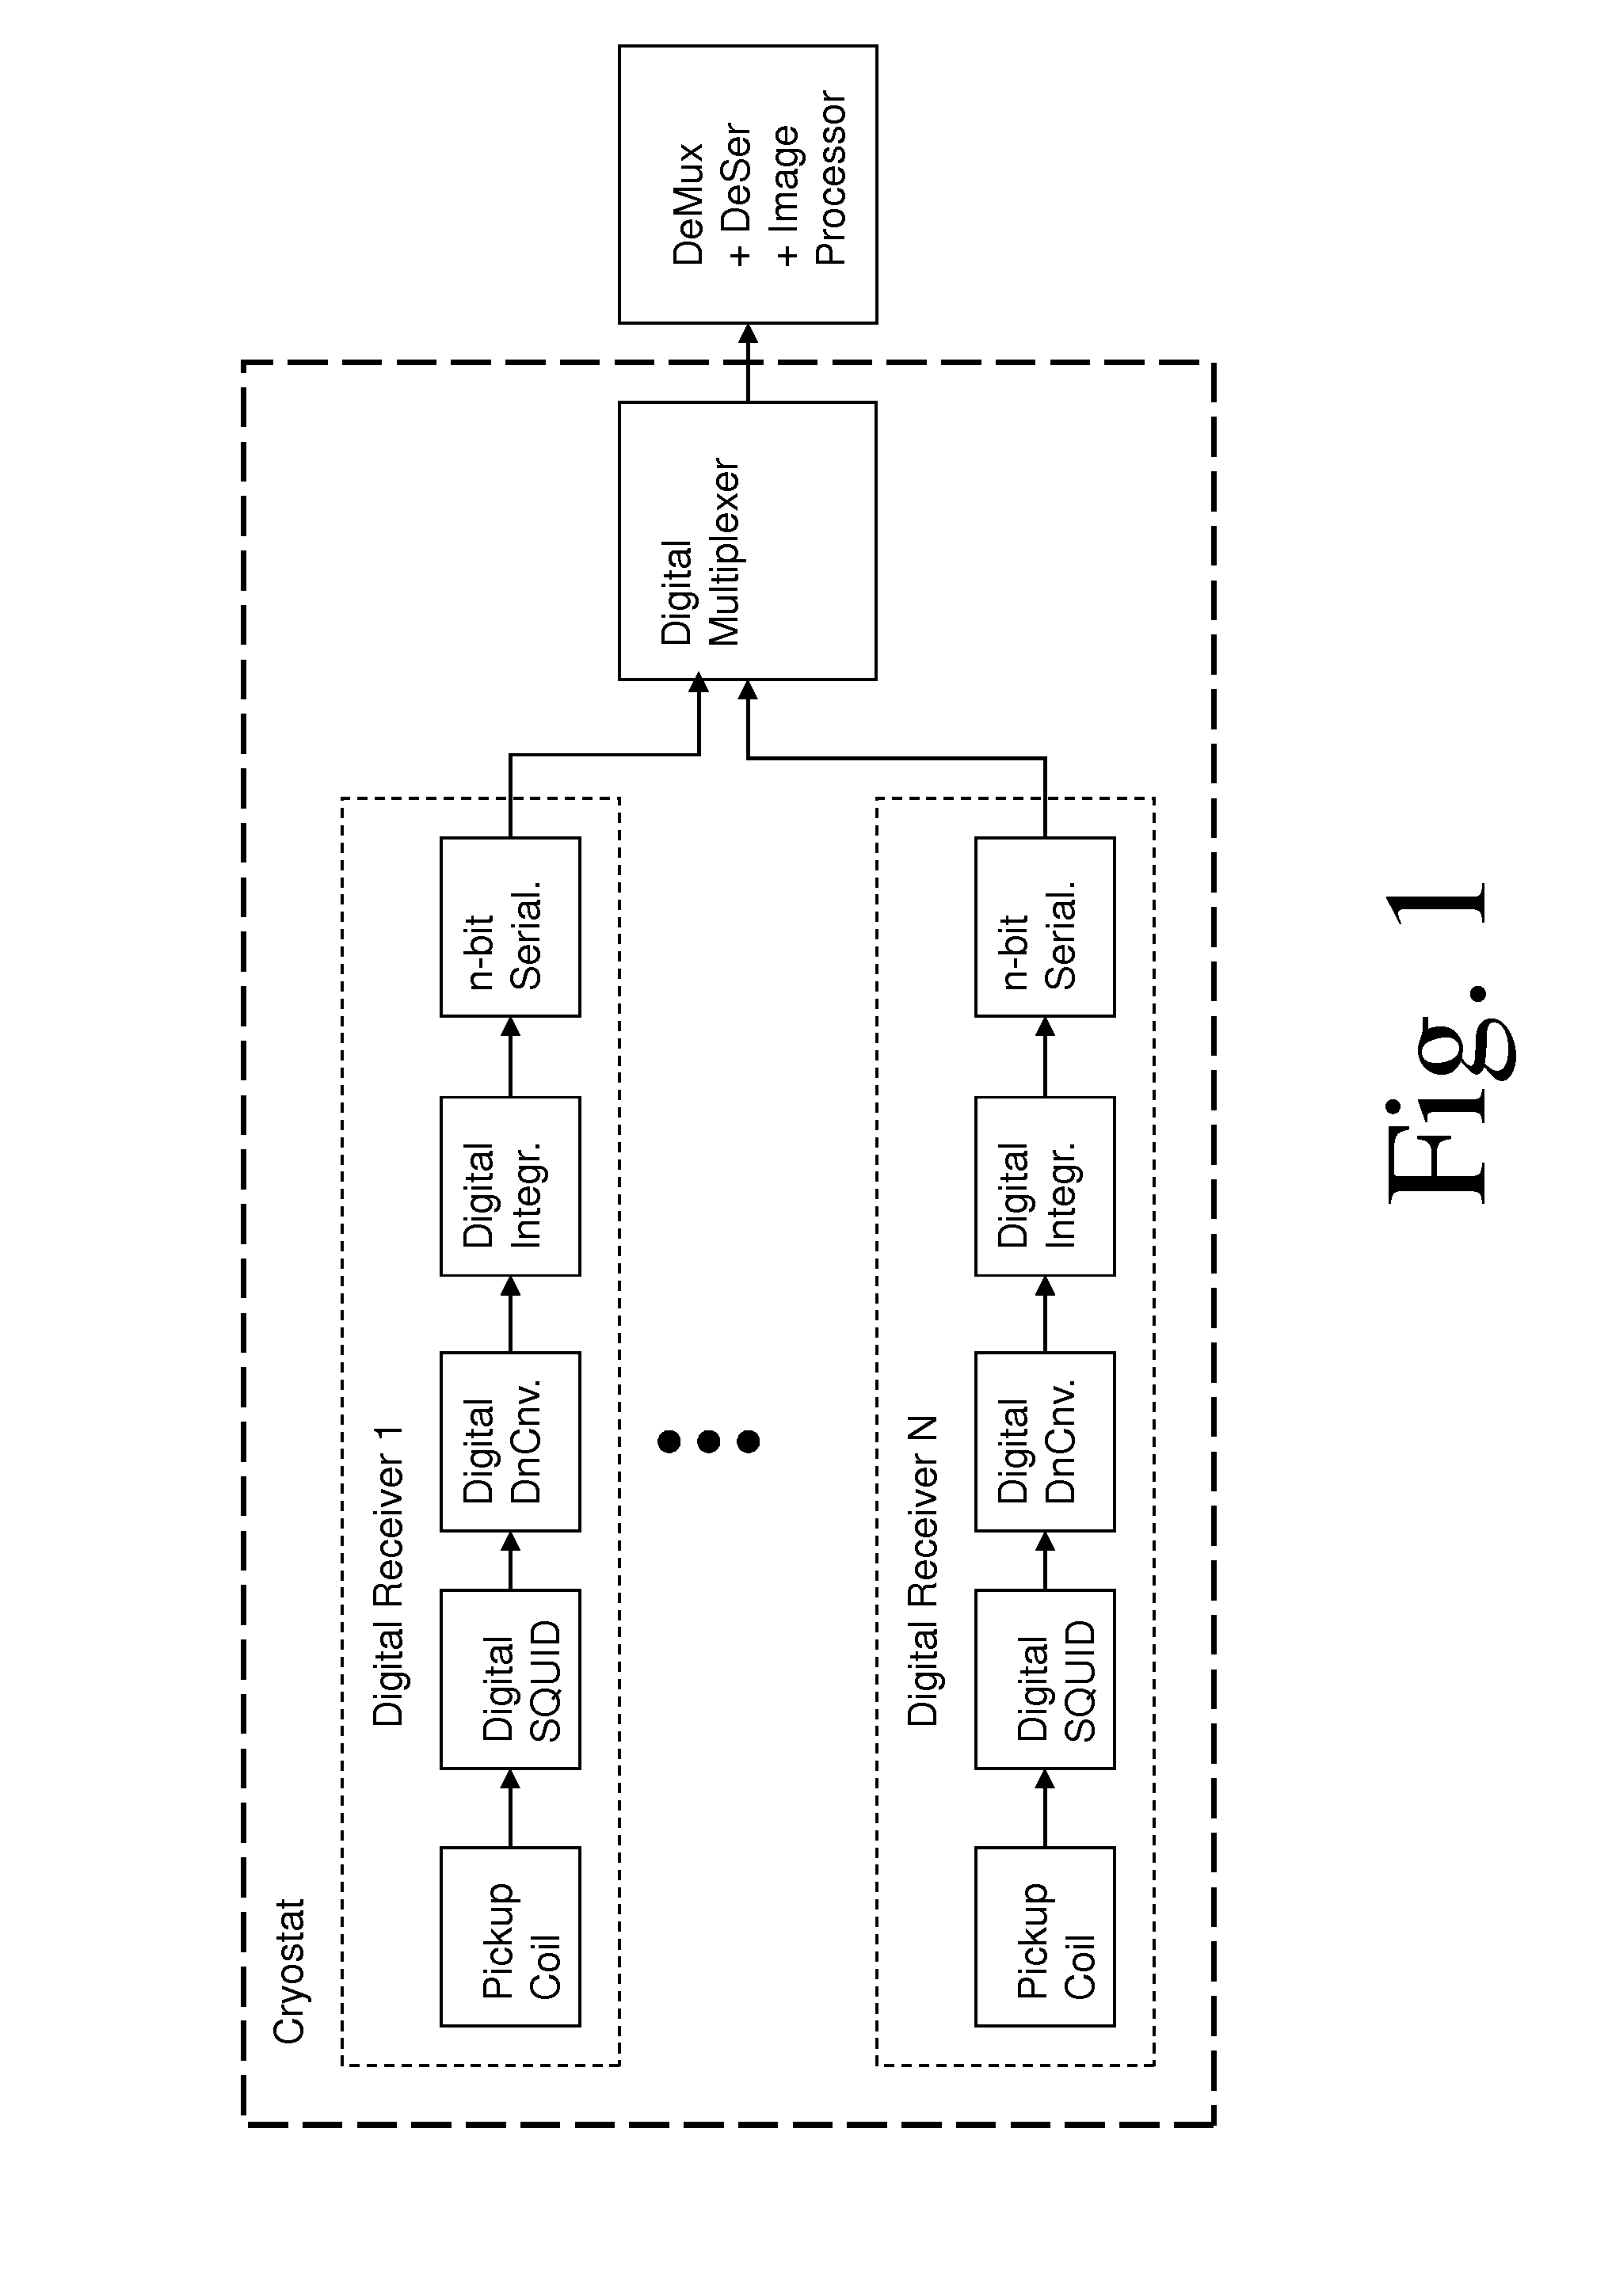 Magnetic resonance system and method employing a digital SQUID